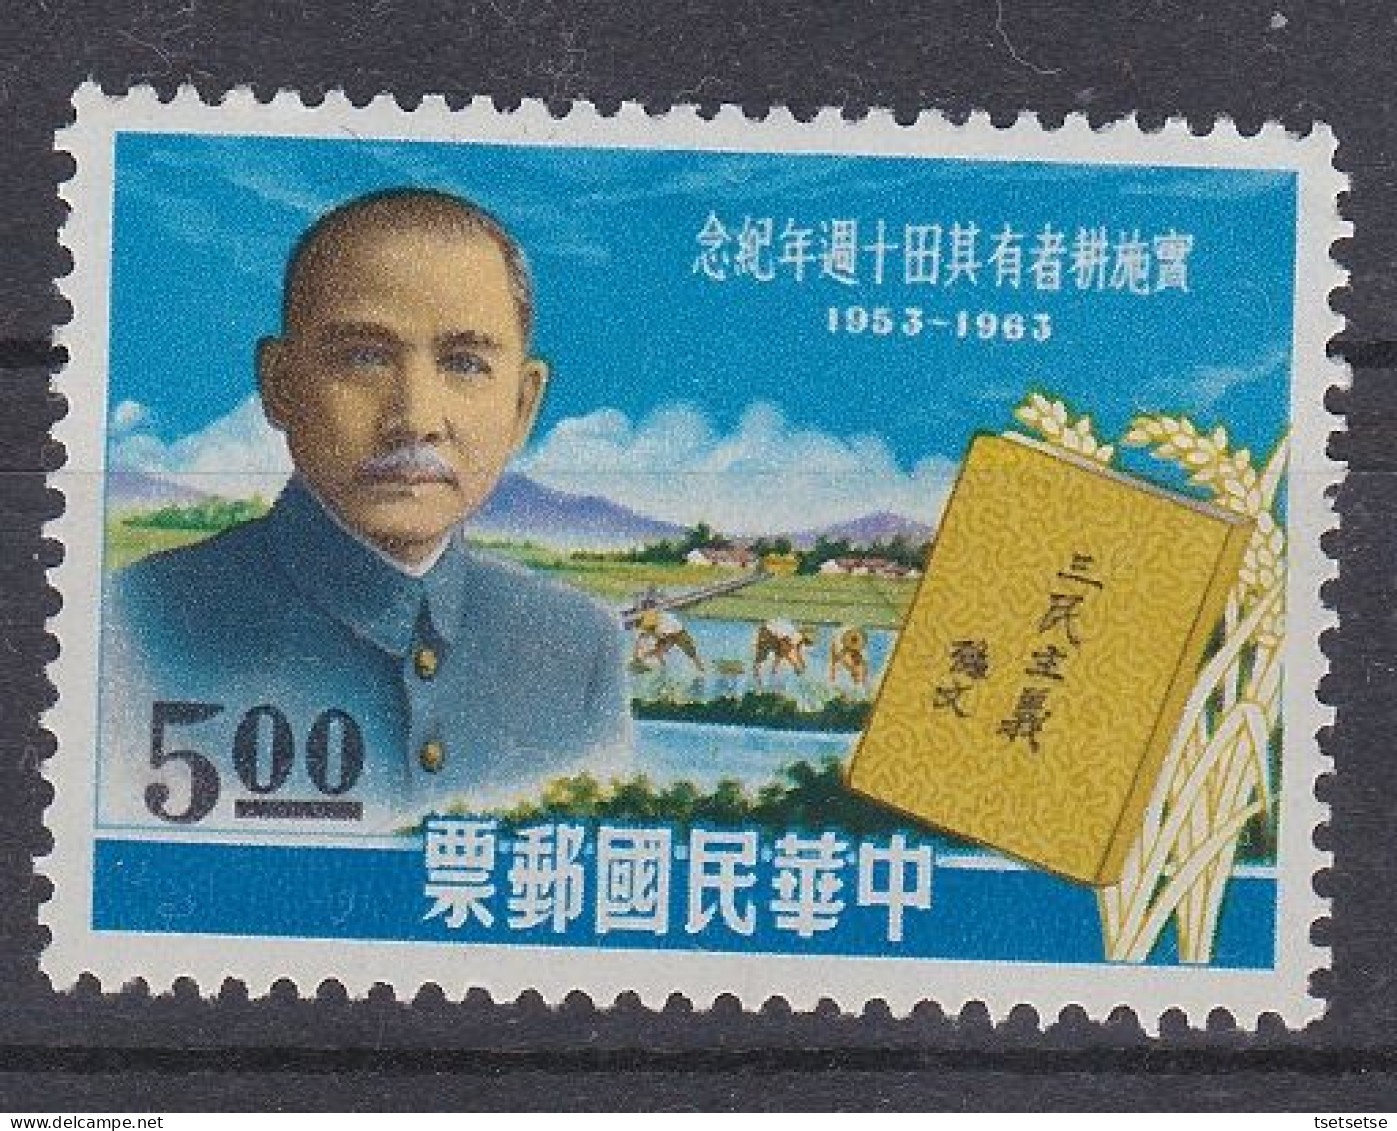 $85 CV! 1963 RO China Taiwan Land To The Tillers Stamp Set, #1383, Mint Unused VF H OG + Mint #C61 - Neufs